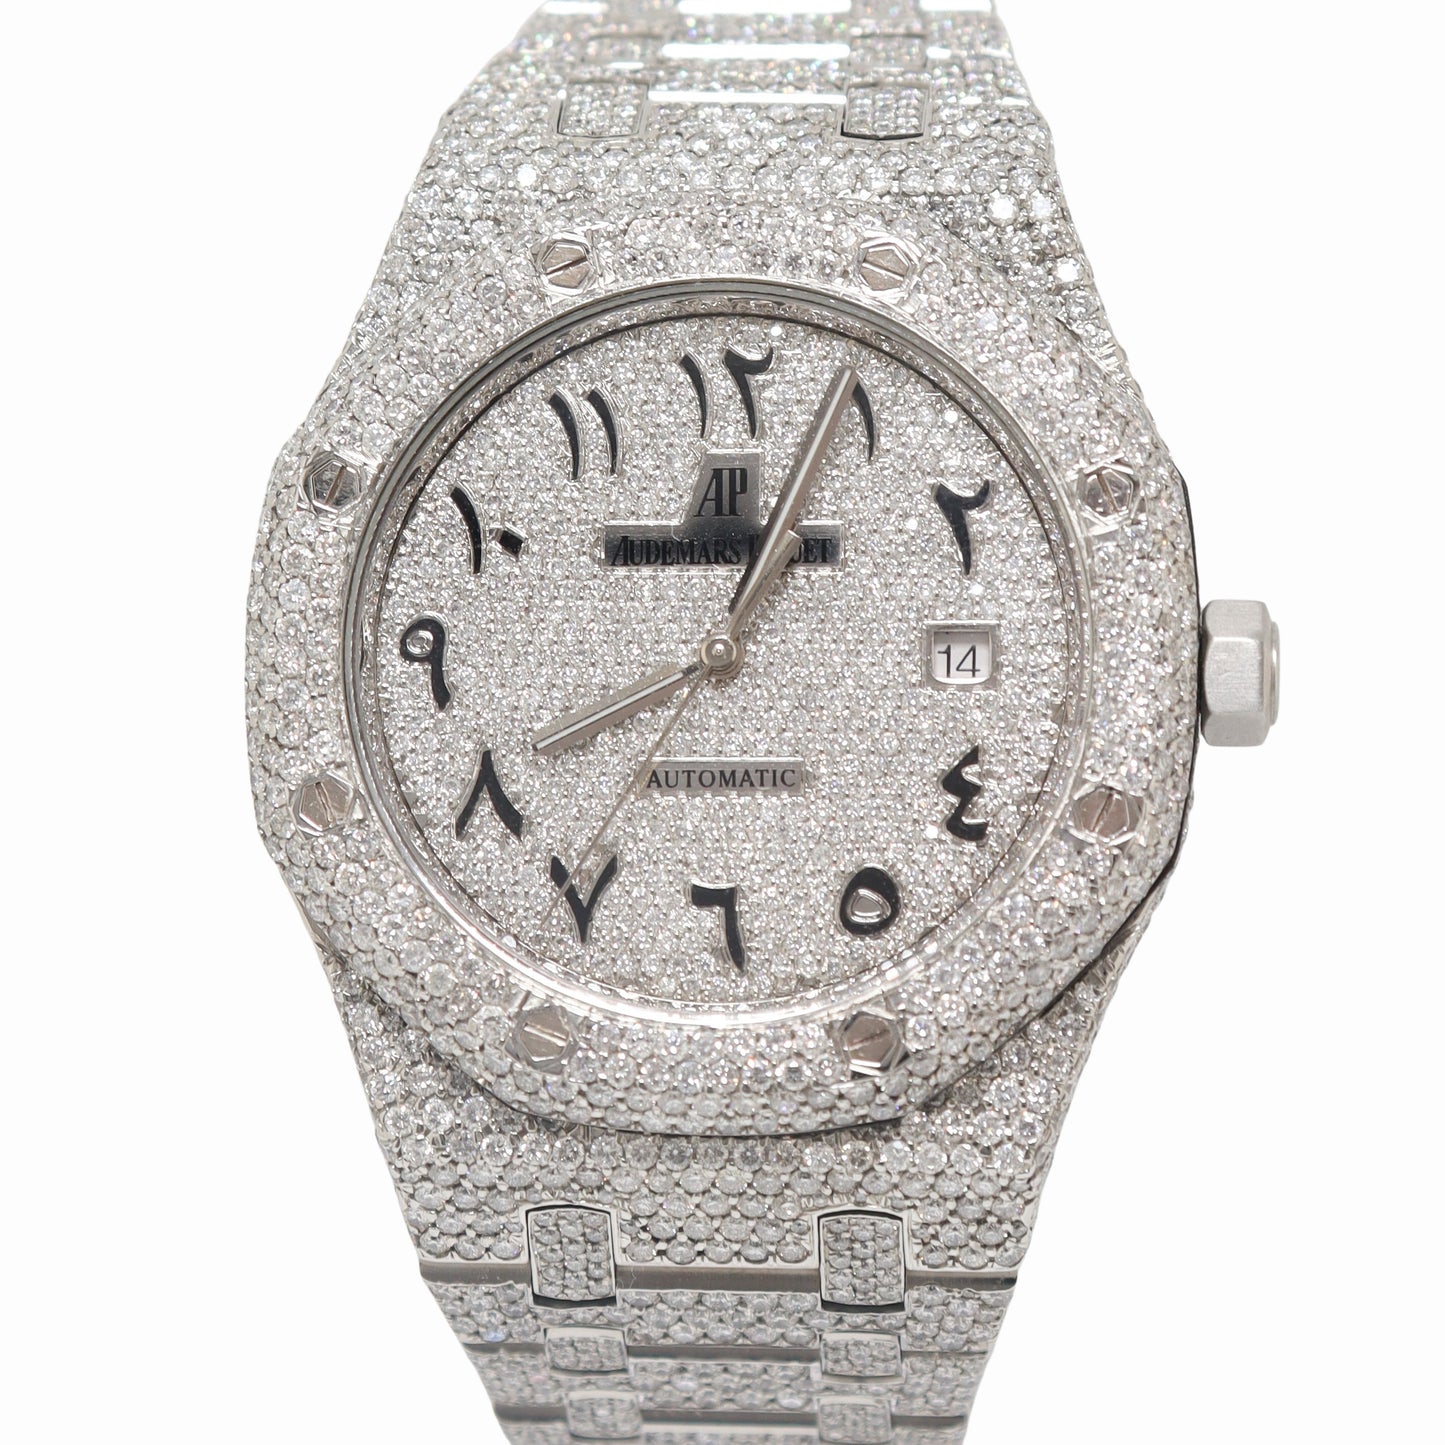 Stal tornado wedstrijd Audemars Piguet Royal Oak 41mm ICED OUT Stainless Steel Pave Diamond Dial  Watch | Happy Jewelers